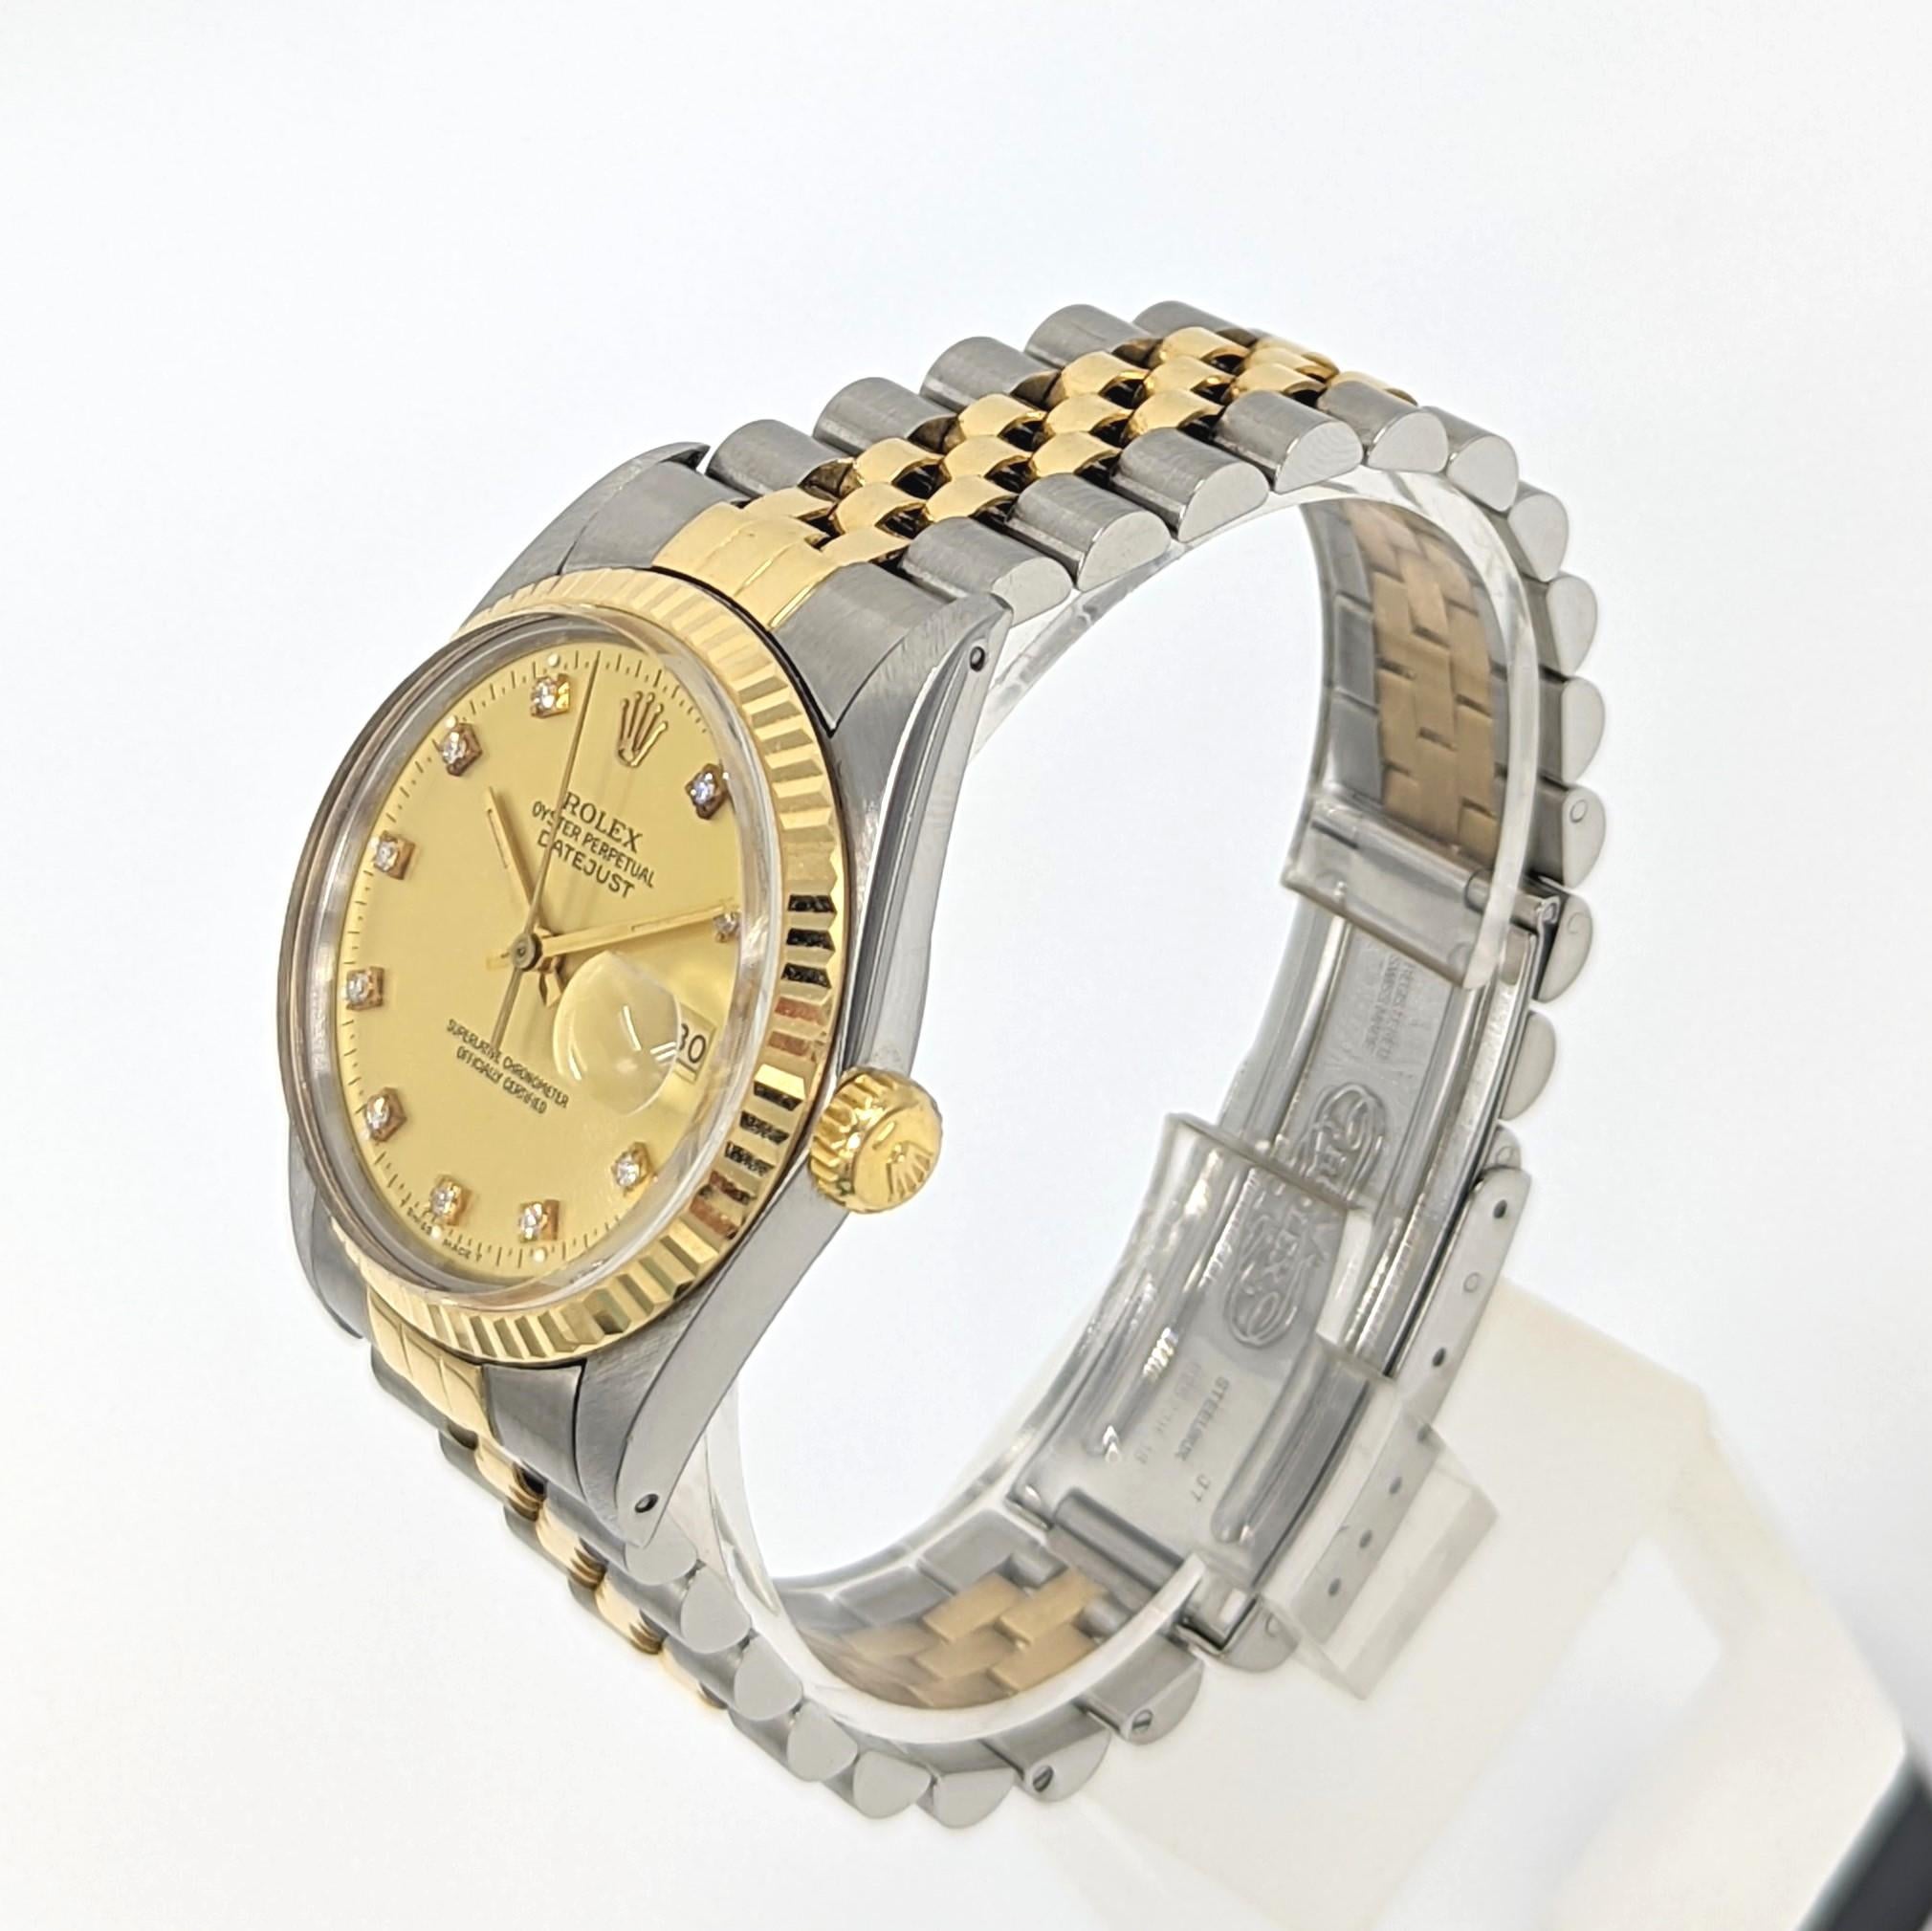 A fine 18K/SS two tone Rolex Datejust (36mm) with desirable factory champagne diamond dial, in excellent condition with minimal stretch to the magnificent 18K/SS Rolex Jubilee 5 link bracelet
Comes in original Rolex box

Ref: 16013
Movement: 3035